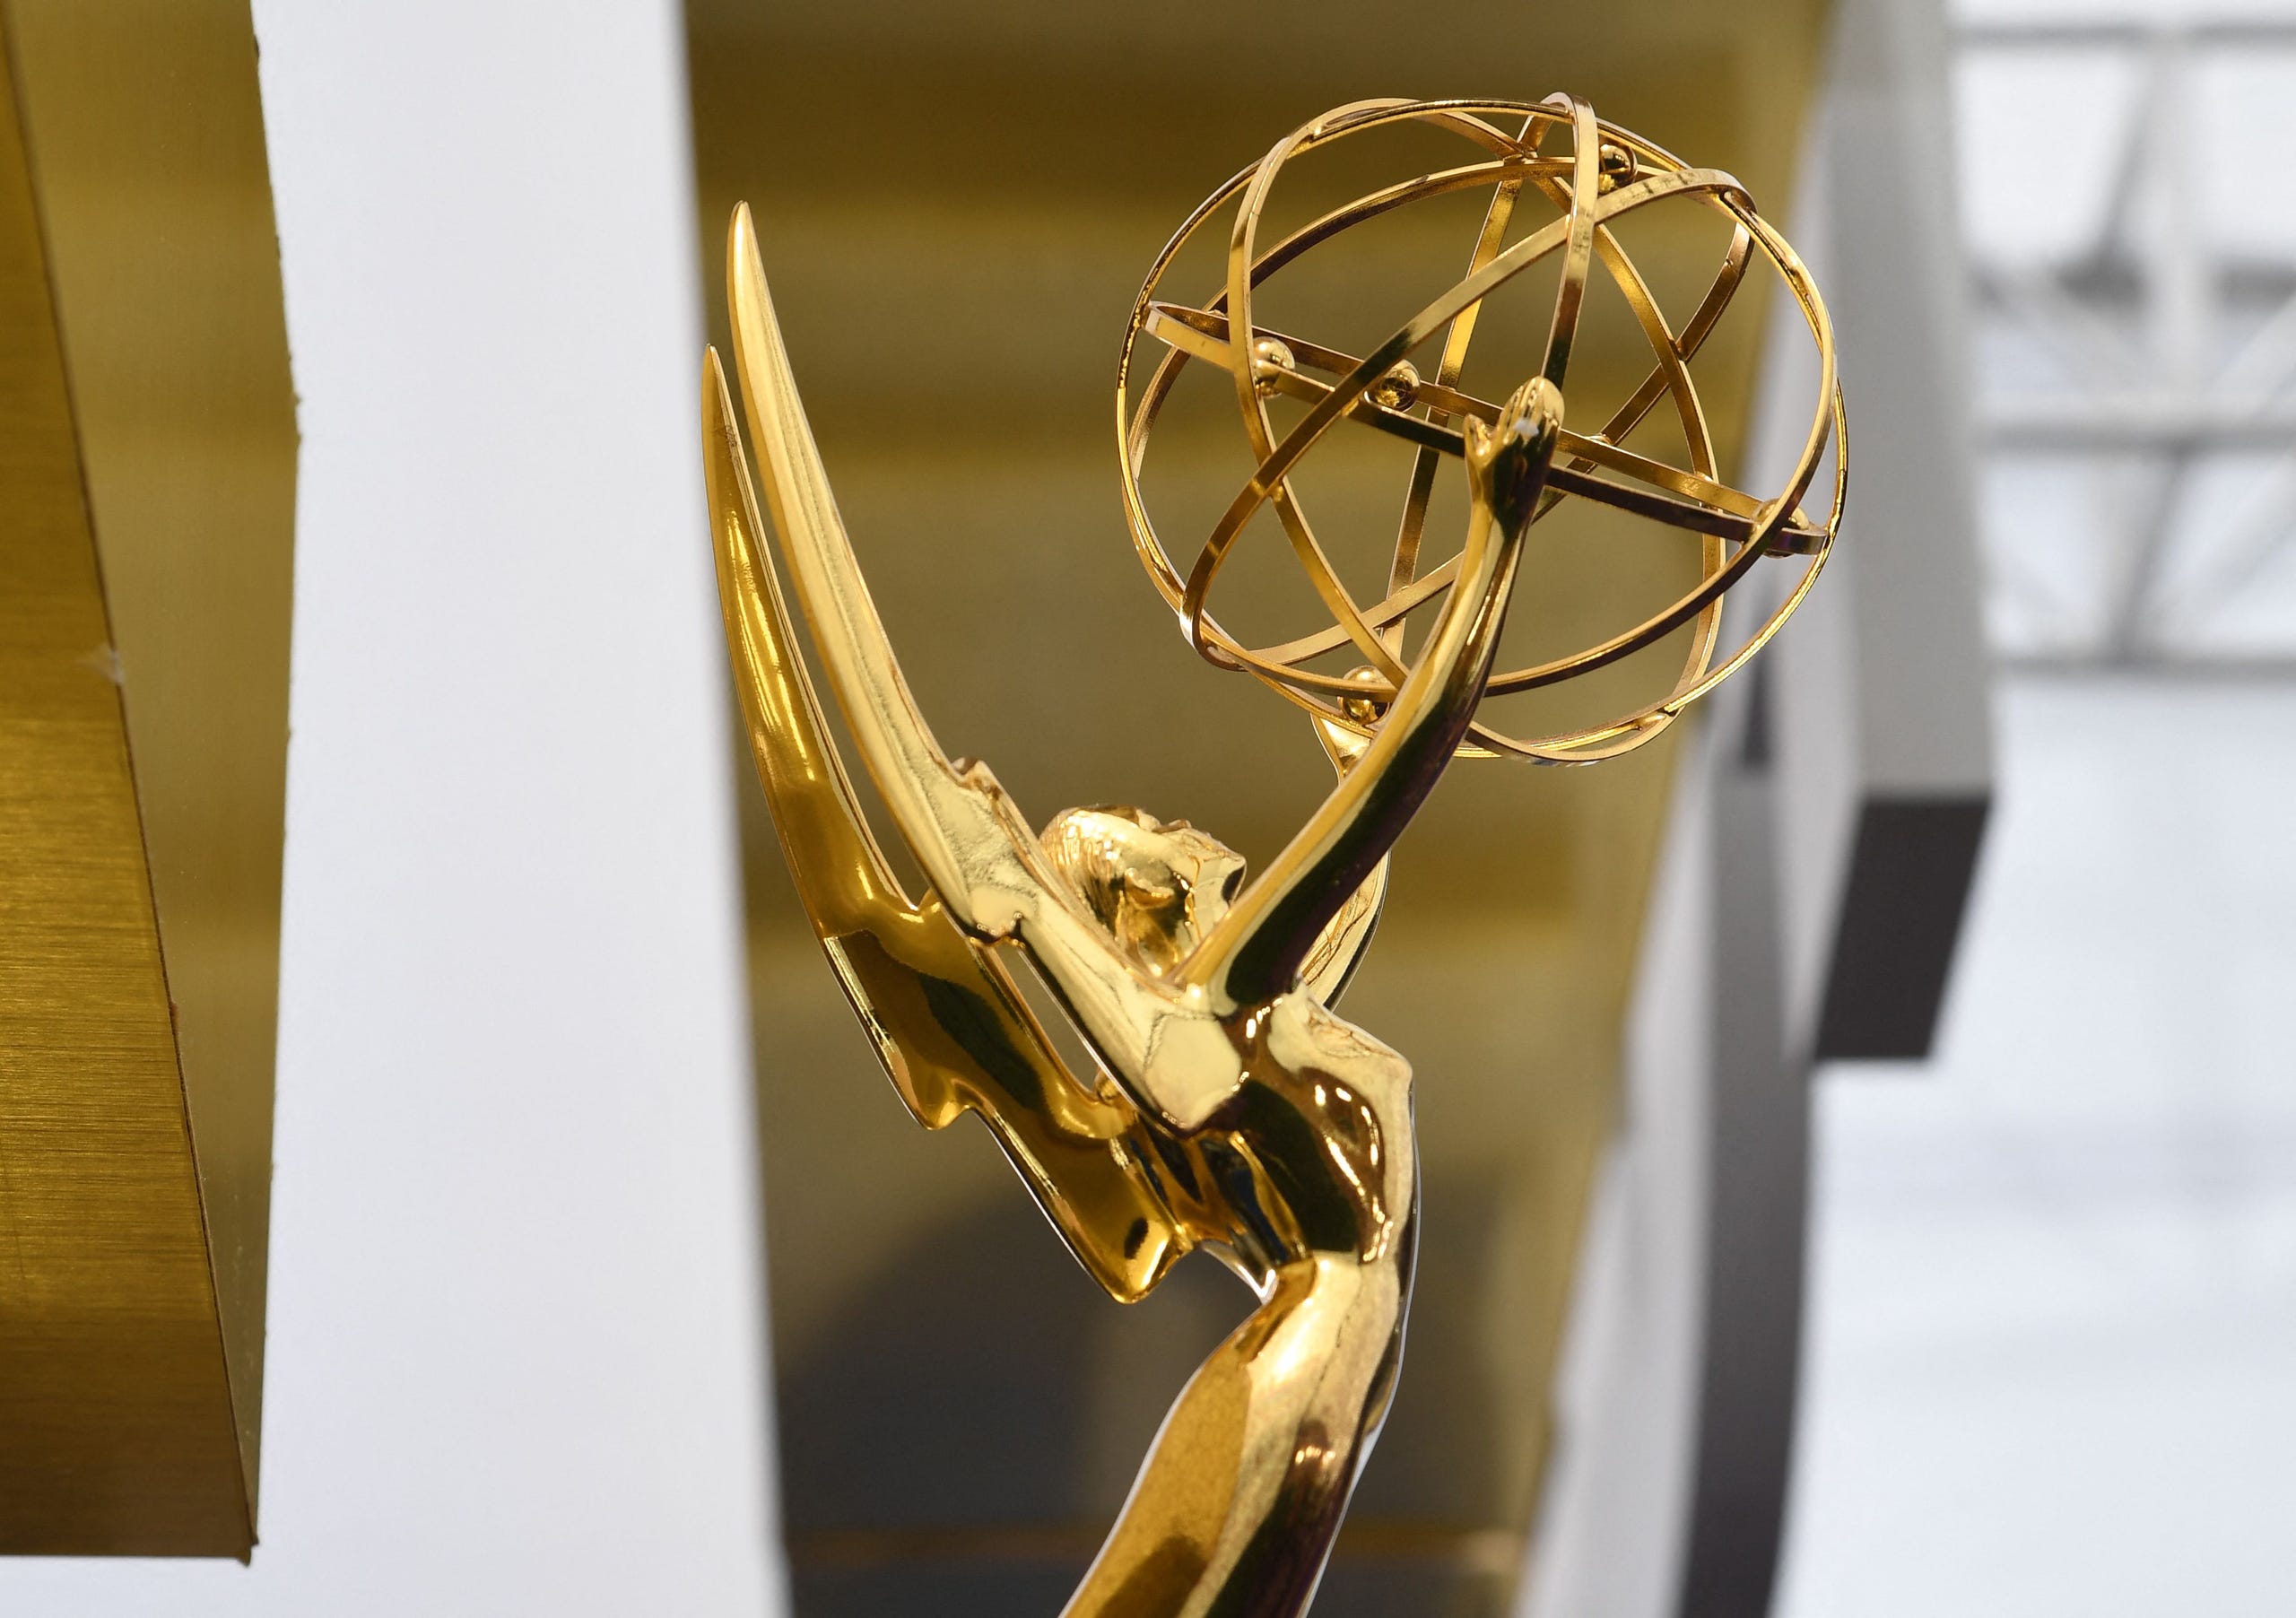 Inclusion of Black Actors Within the 2021 Emmy Nominations